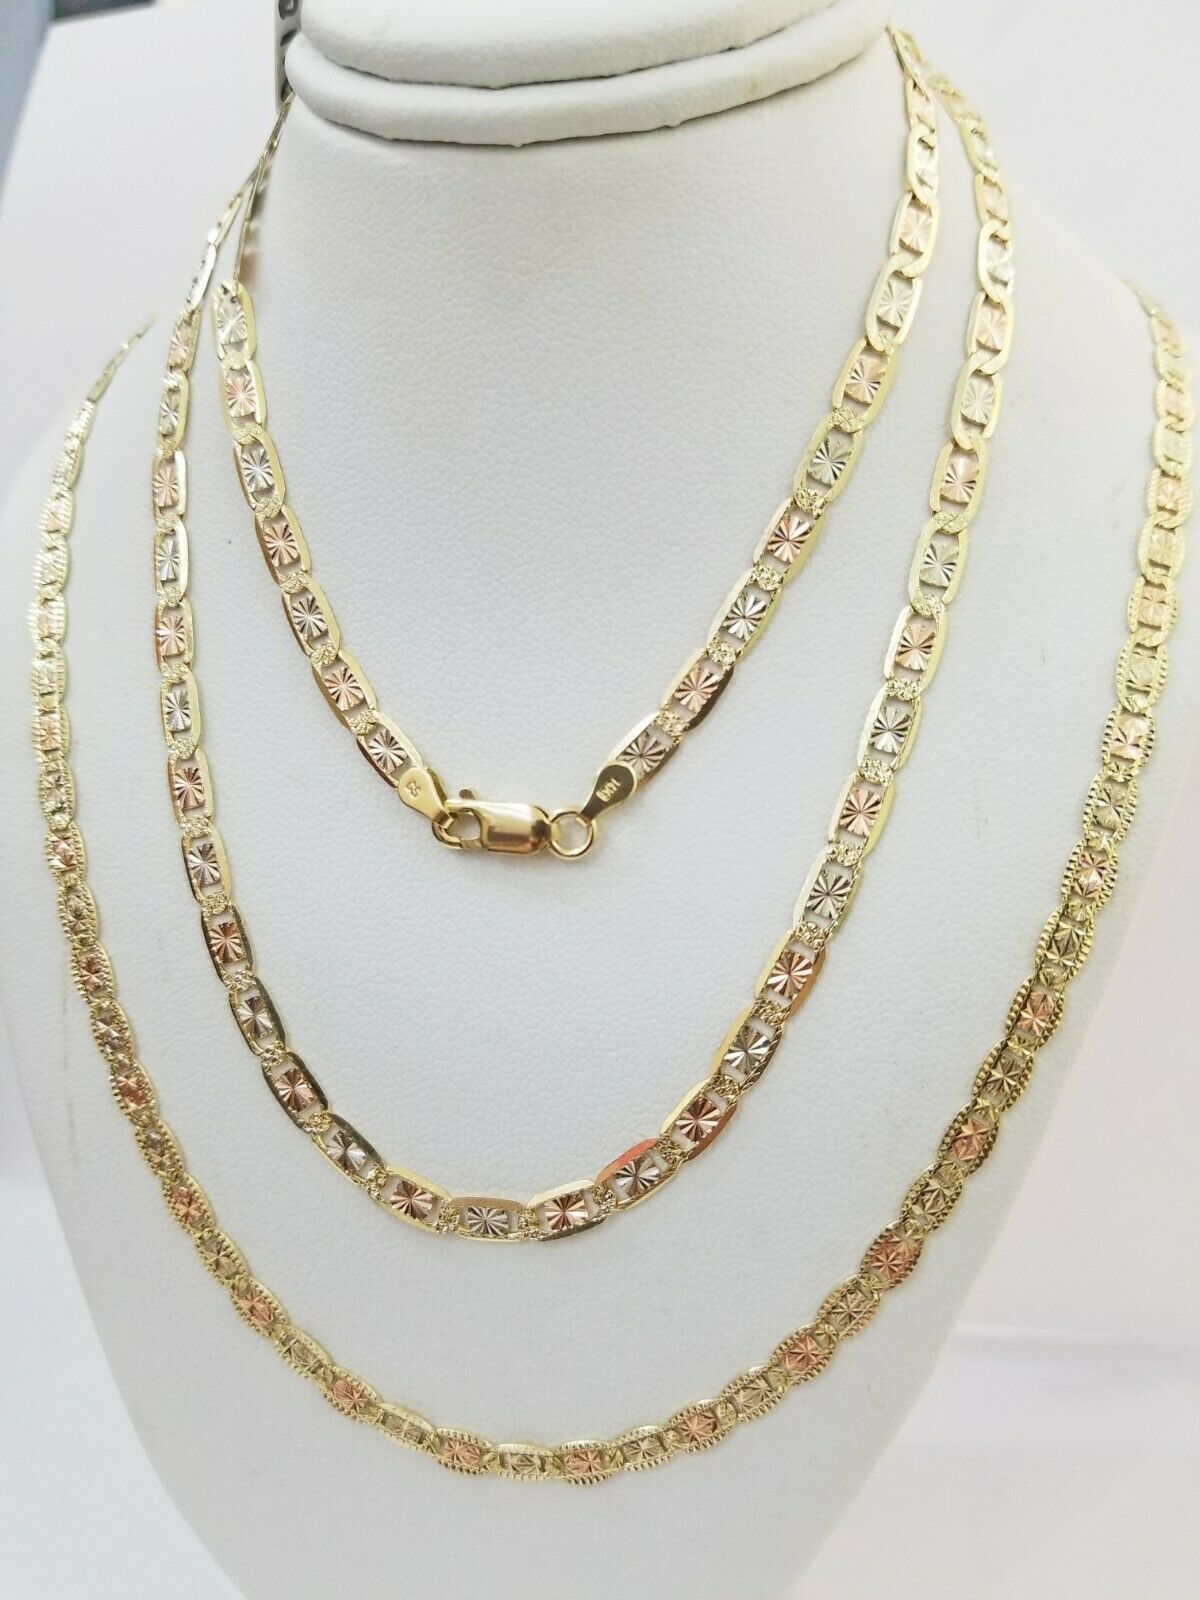 012 Gauge Rope Chain Necklace in 14K Gold - 16